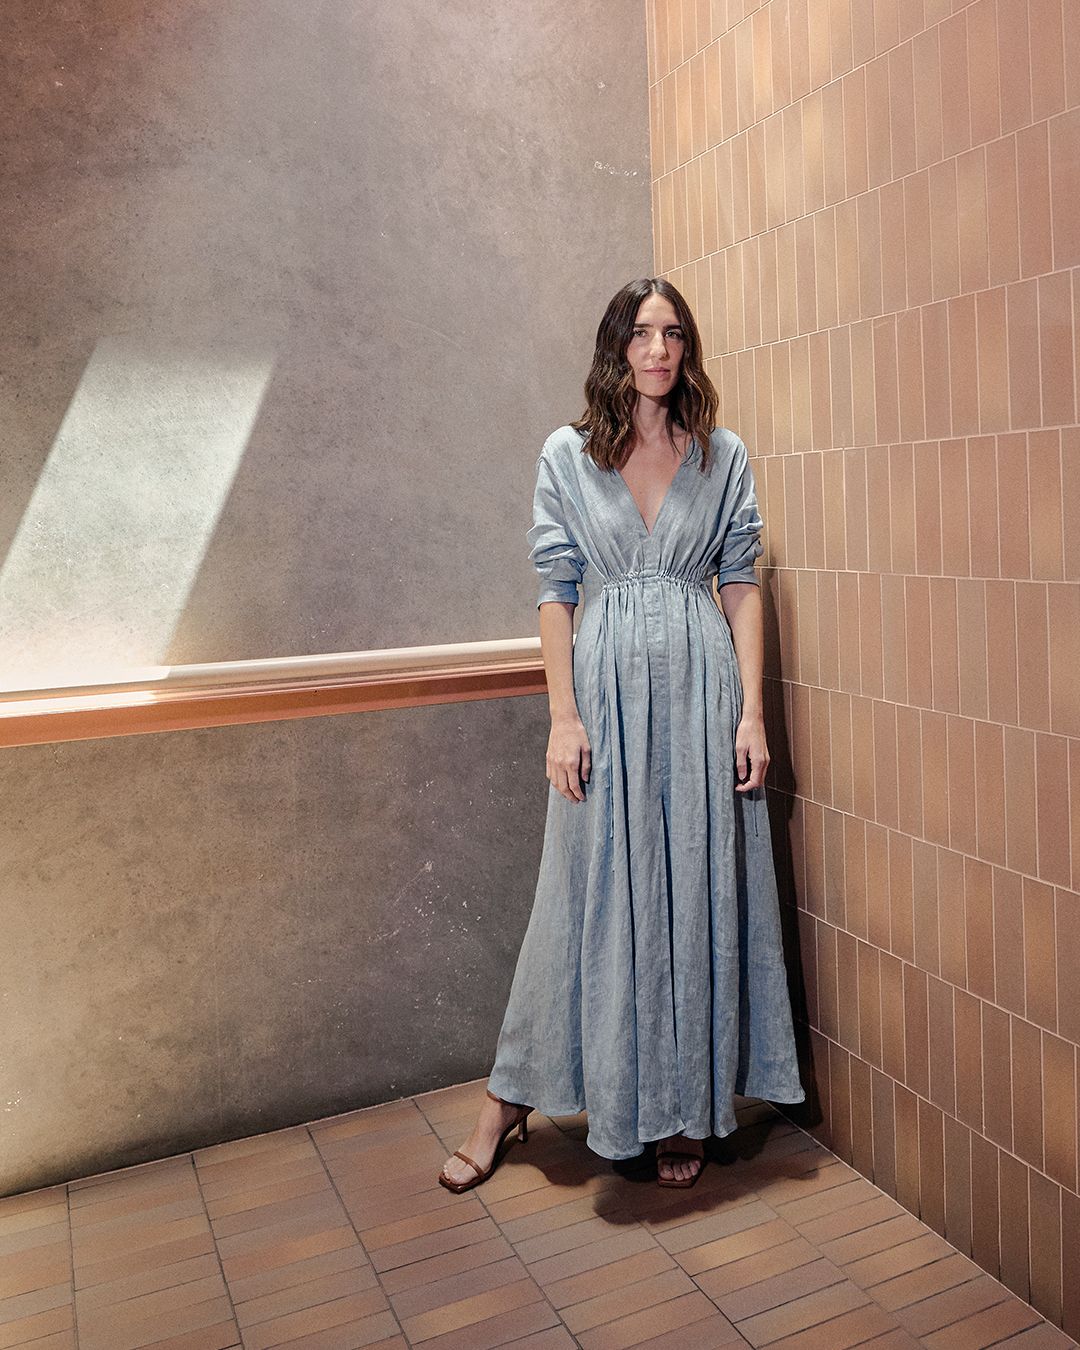 Bianca Marchi wearing a blue grey linen maxi dress standing in a brown tile and concrete hallway